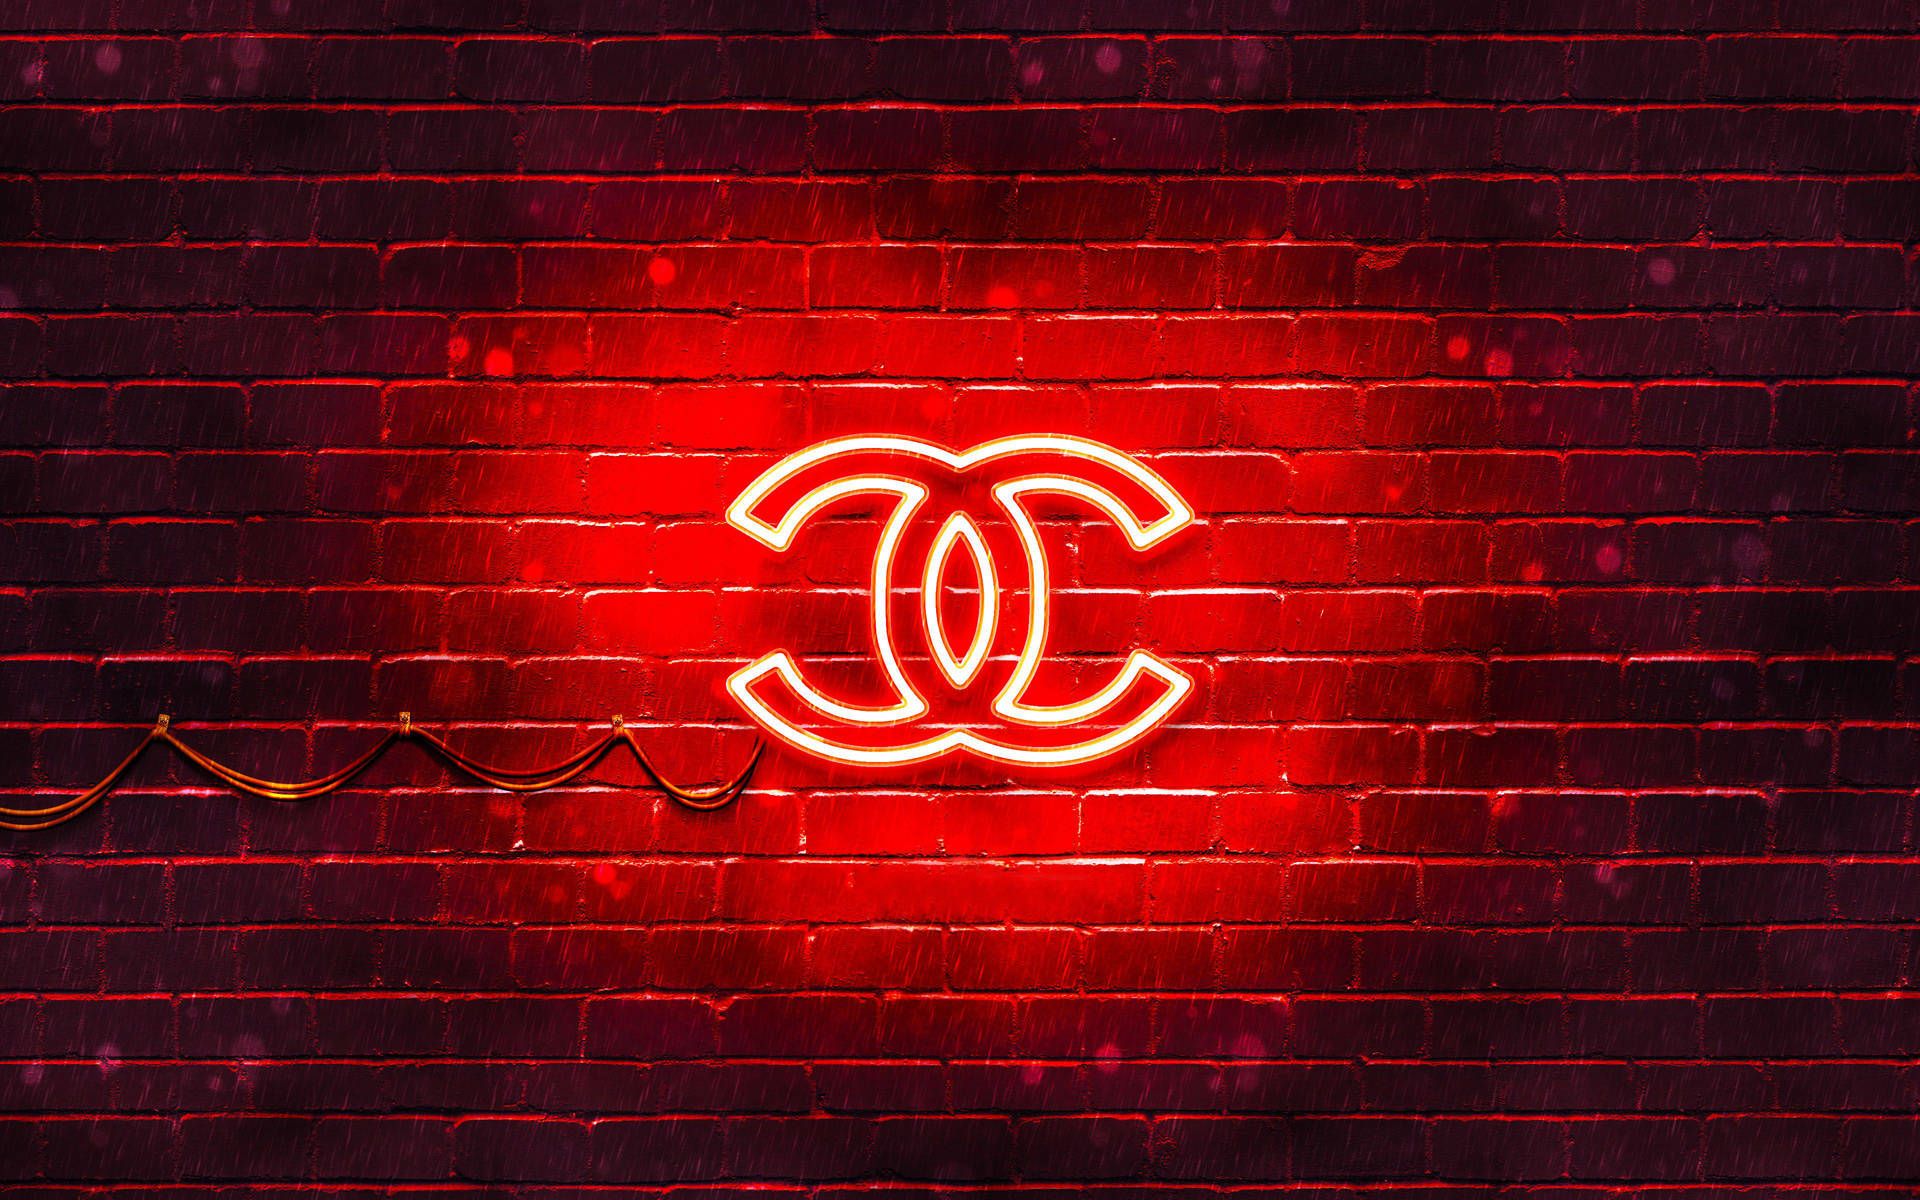 Chanel wallpaper 4k 1080p by mohamed hassan on deviantart for Chanel wallpaper 4k - Chanel